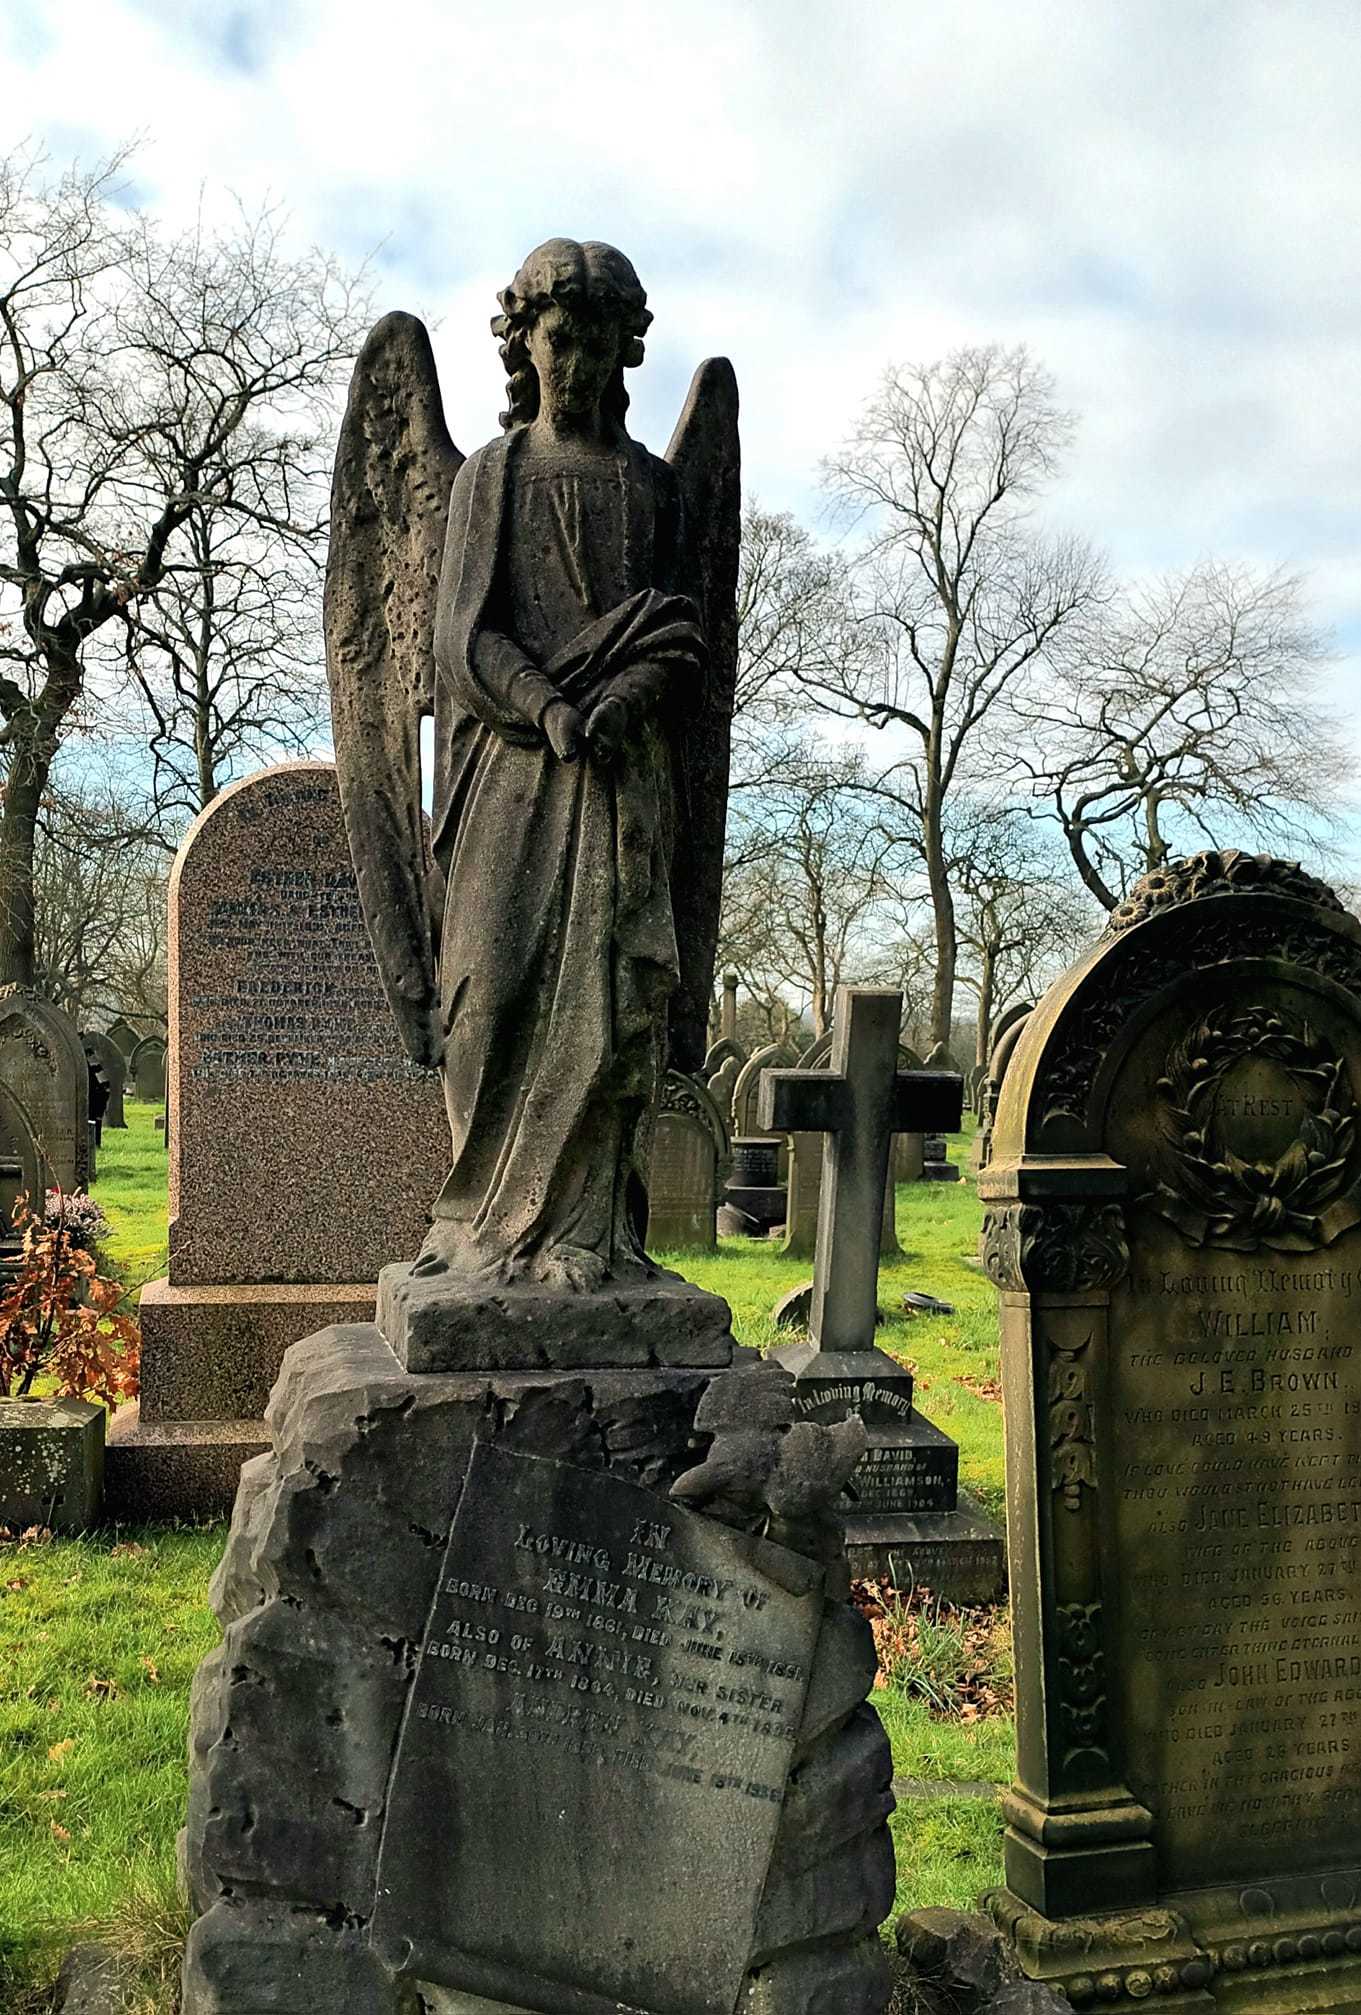 Angelic headstone at St Helens cemetery by Suzie Remadems